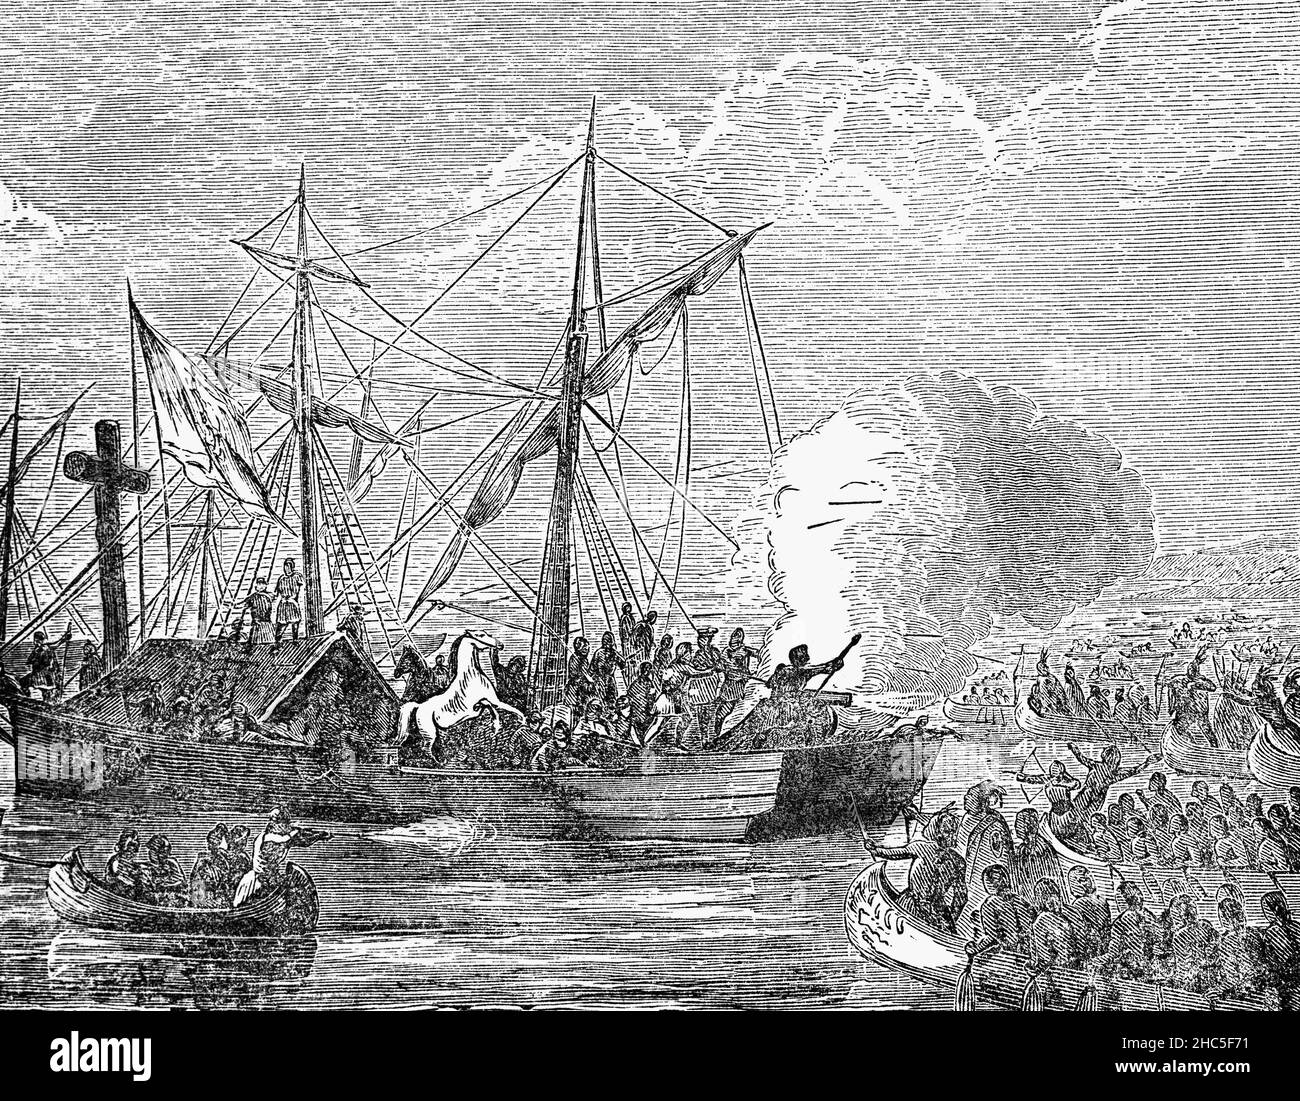 A late 19th Century illustration of Spanish explorers descending the Mississippi River following the death of Hernando de Soto (1500-1542). A Spanish explorer and conquistador, he was best known for leading the first European expedition deep into the territory of the modern-day United States through Florida, Georgia, Alabama, Mississippi, and most likely Arkansas. He was the first European documented as having crossed the Mississippi River. Stock Photo